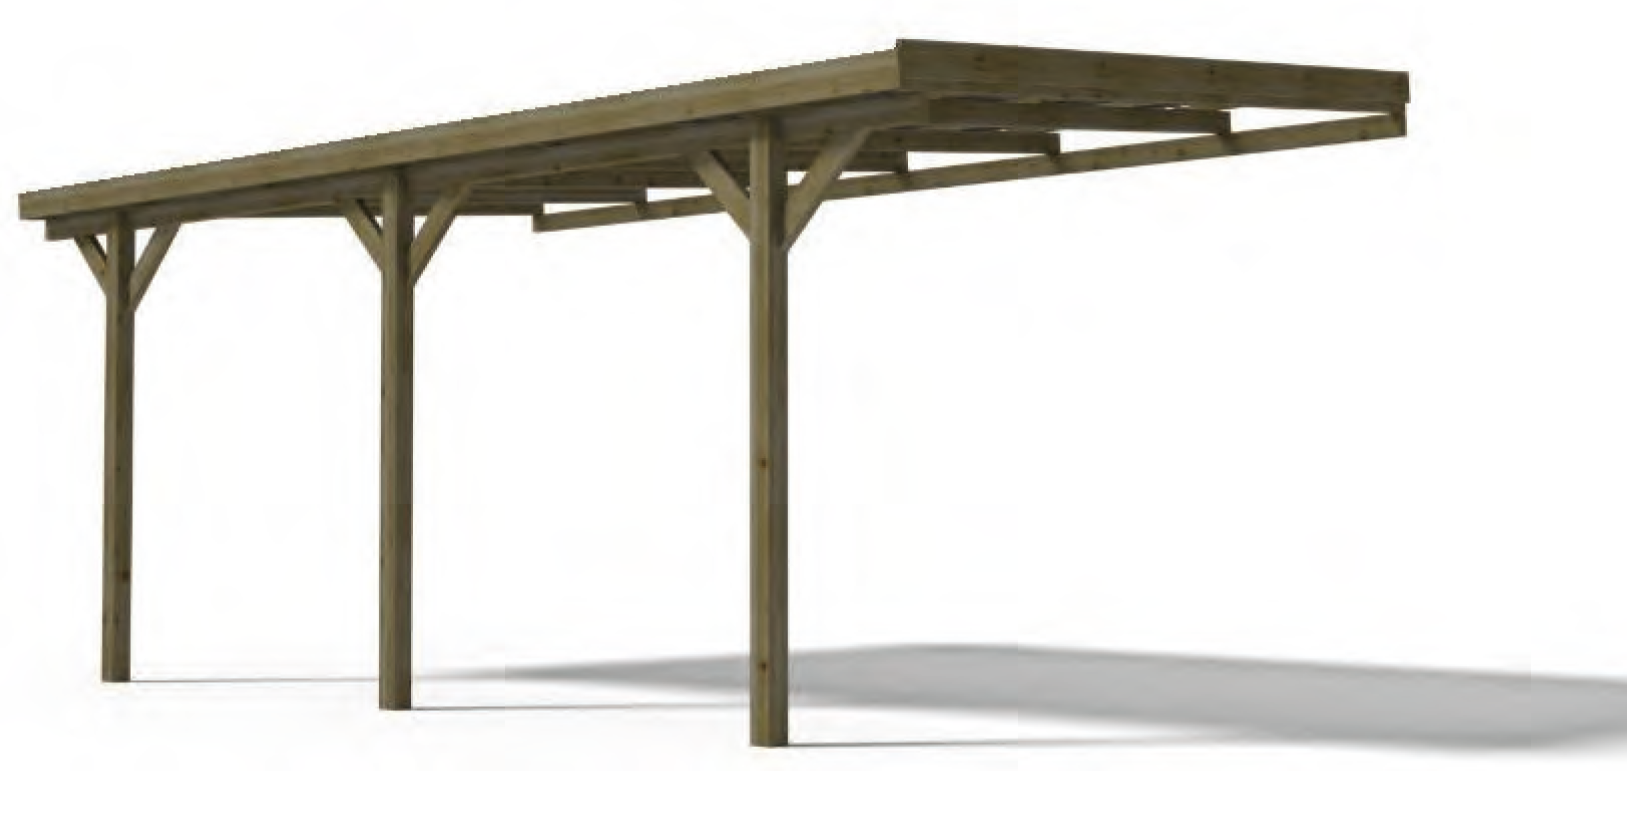 Pergola supported by wood with cover 509 x 302 x 240 cm